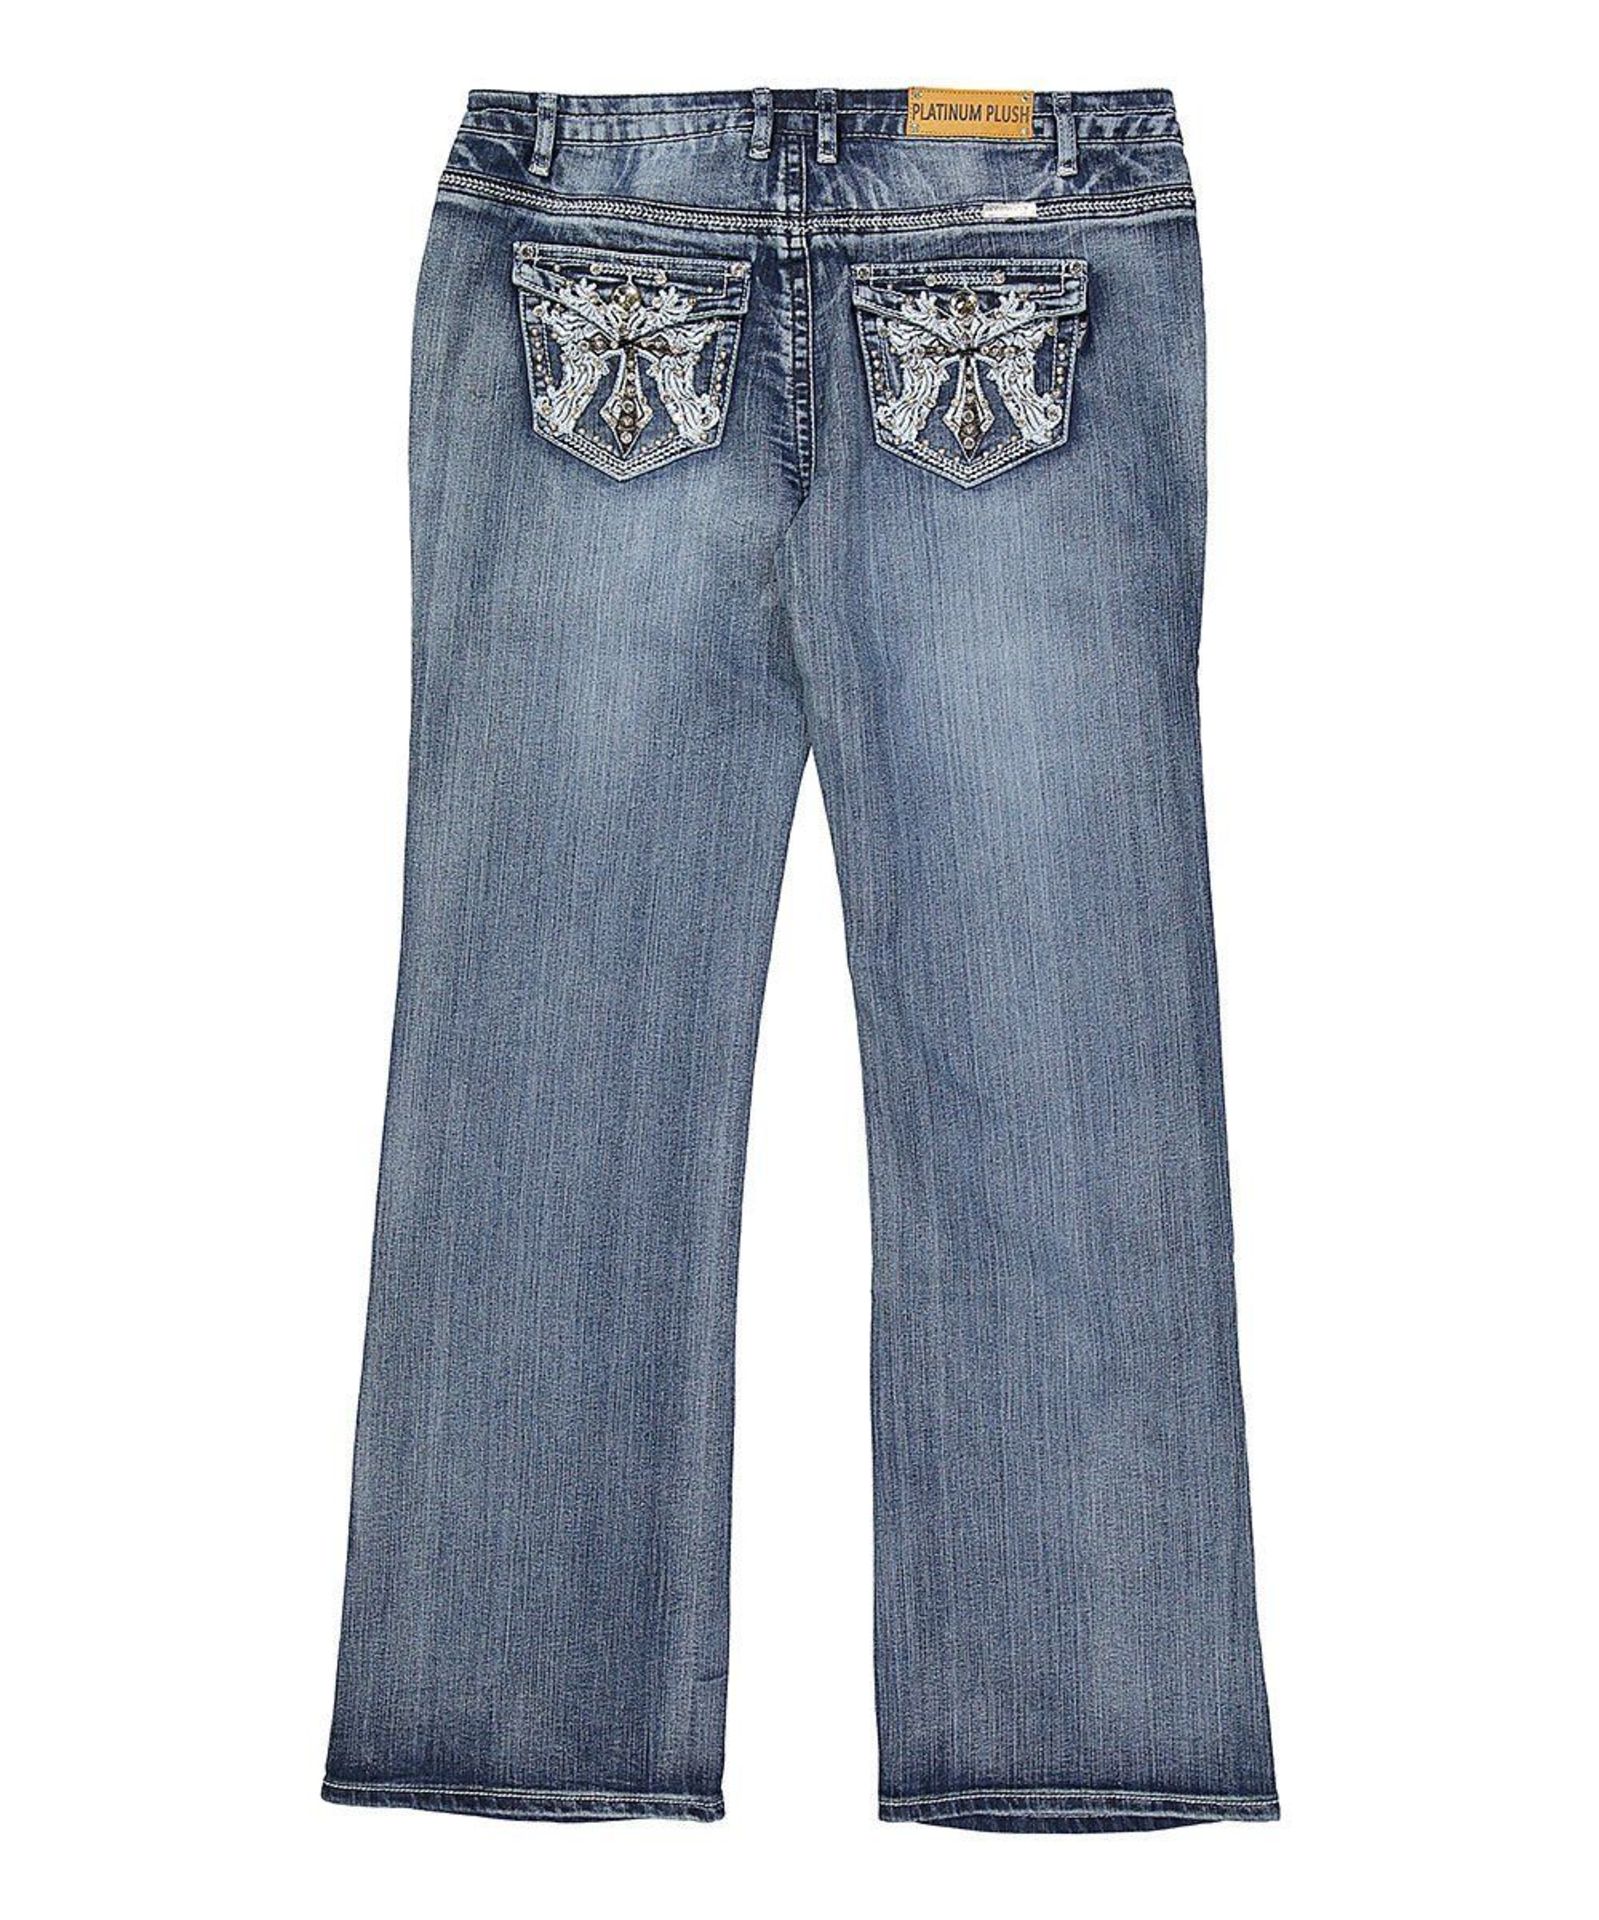 Bus Stop Denim Embroidered Pocket Jeans -Plus (Size 19) (New with tags) [Ref: 41573590- T-55] - Image 2 of 2